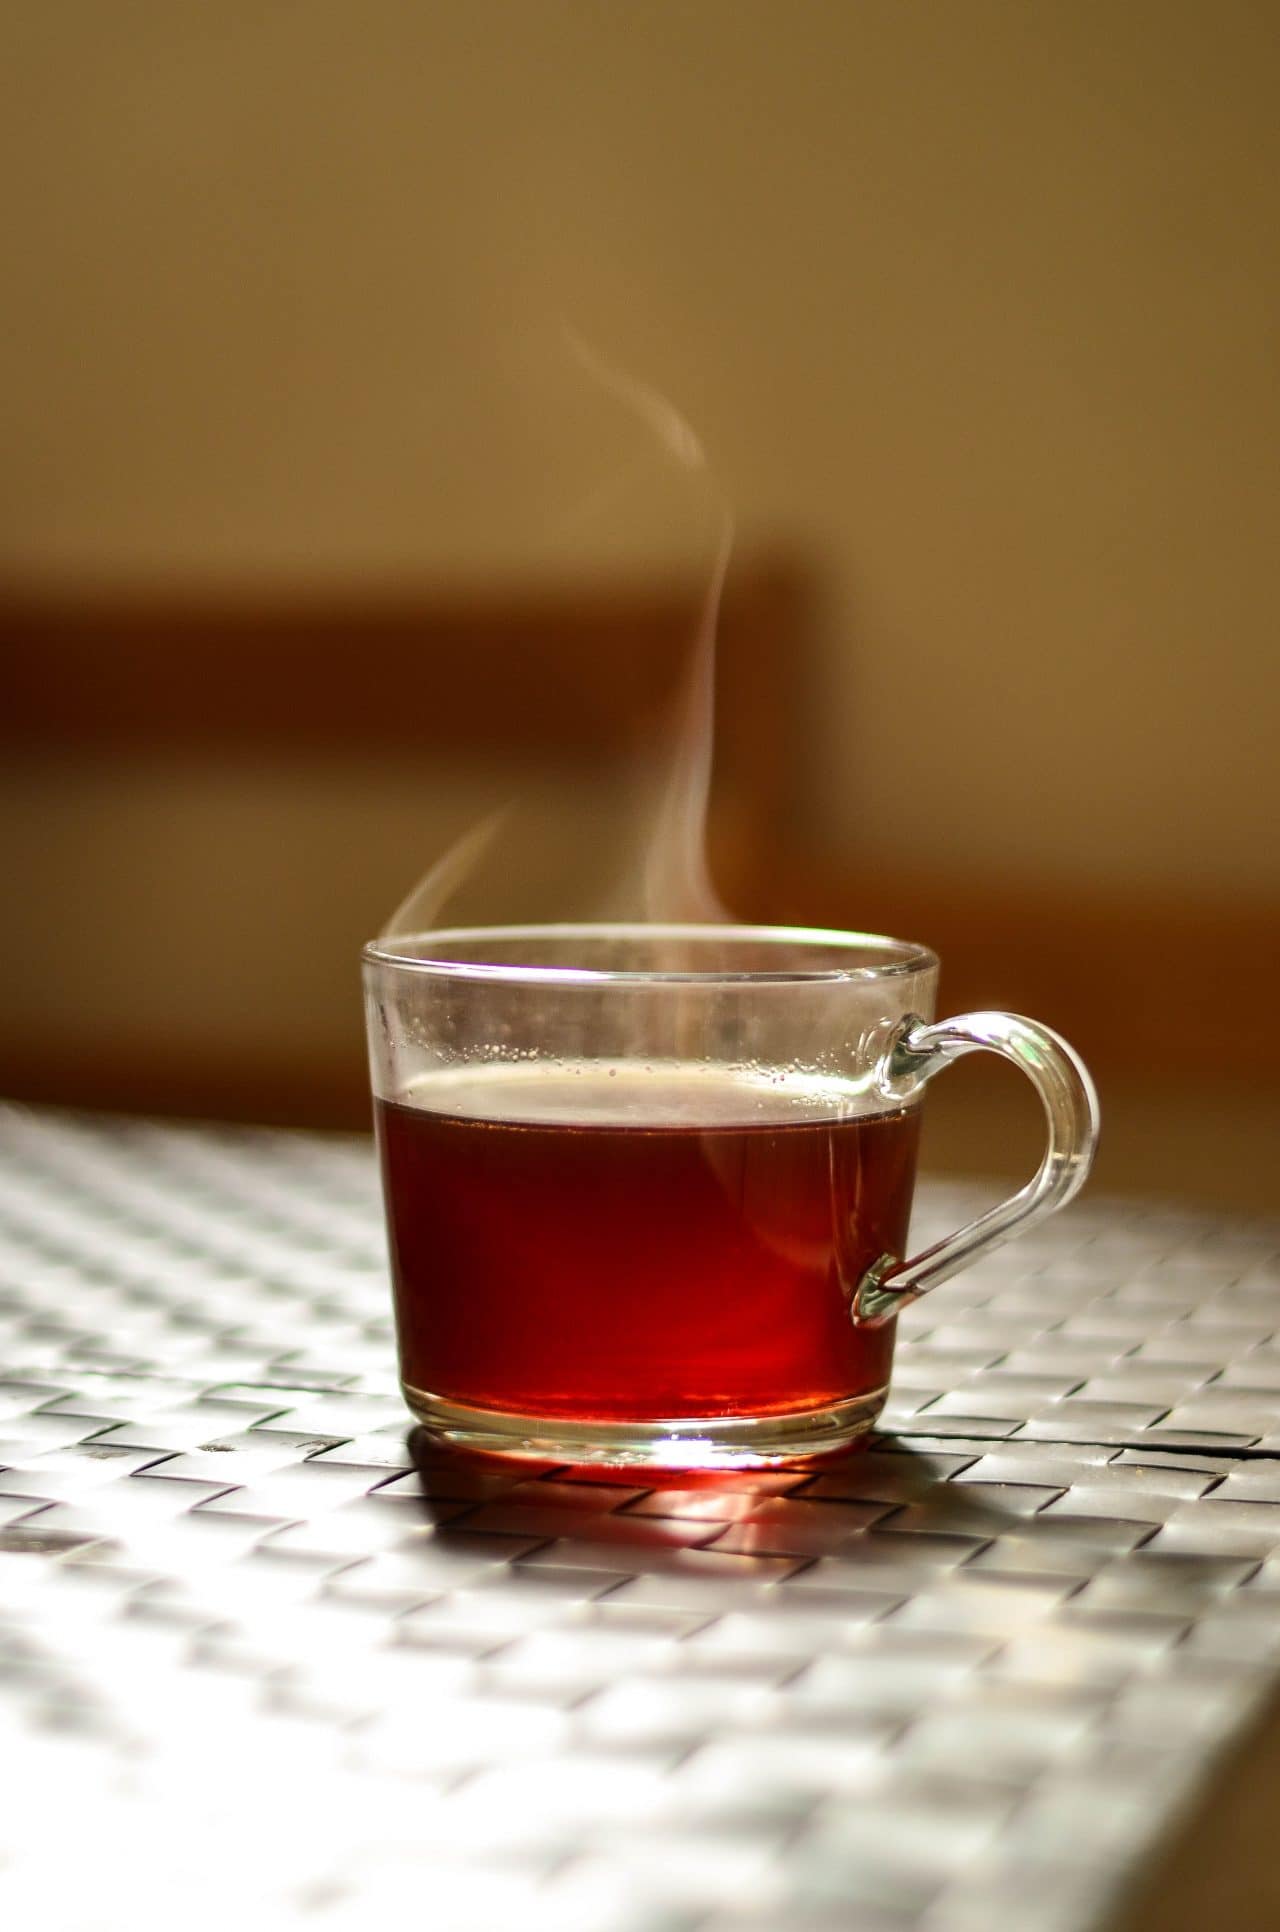 A cup of tea on a counter.